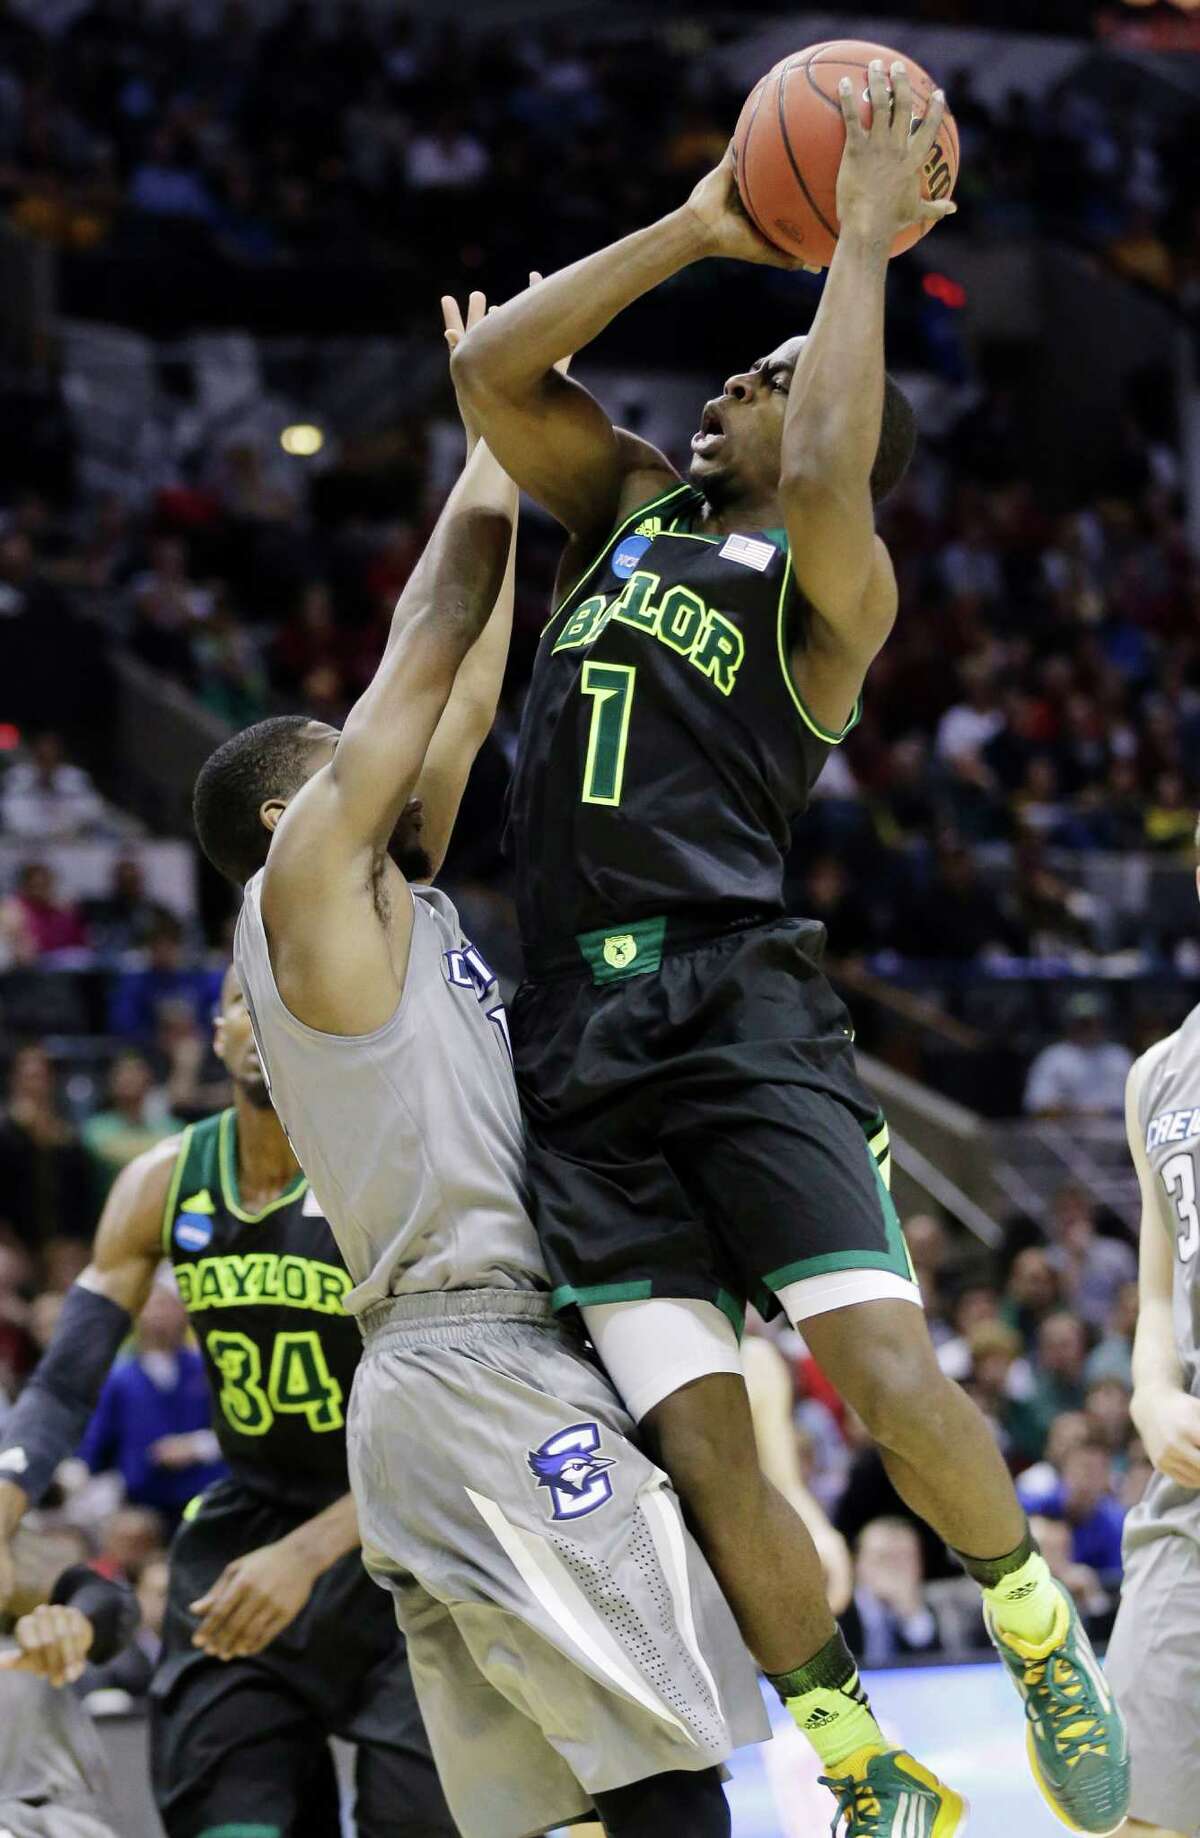 Kenny Chery, shooting over Creighton's Jahenns Manigat, has been the catalyst for Baylor's 12-2 run of late.